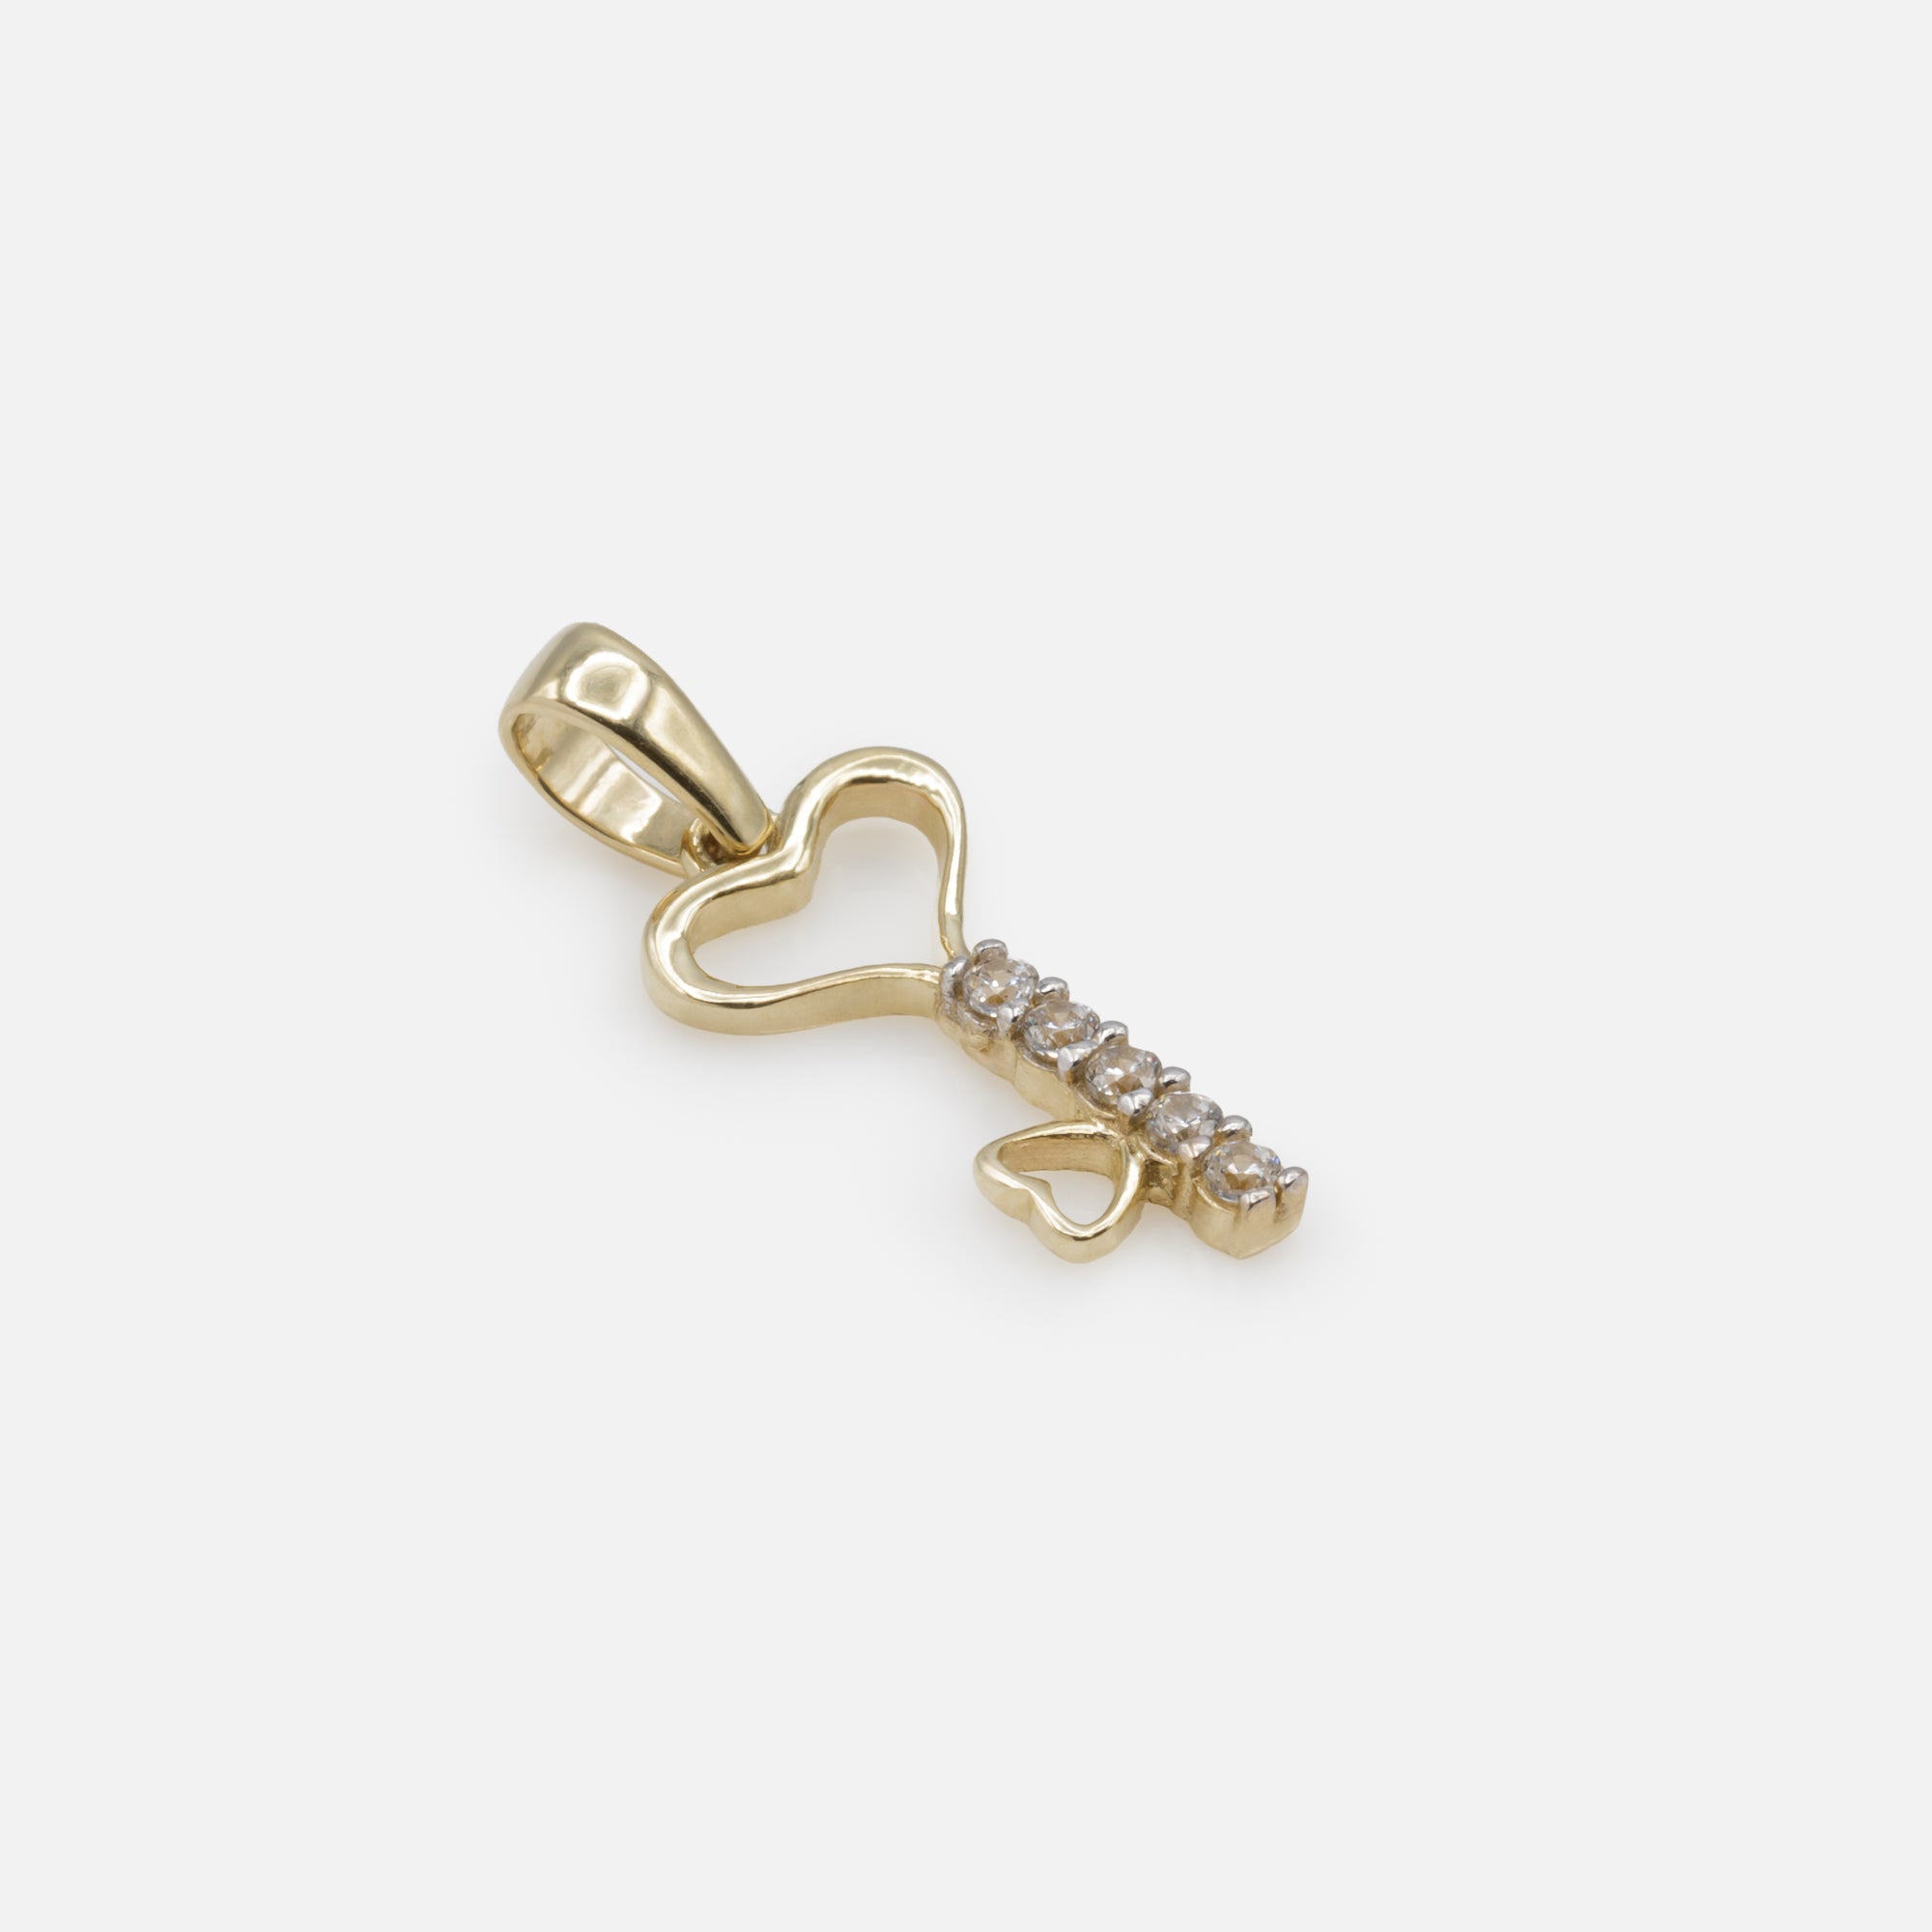 Key of the Heart Charm with Cubic Zirconia in 10k Gold